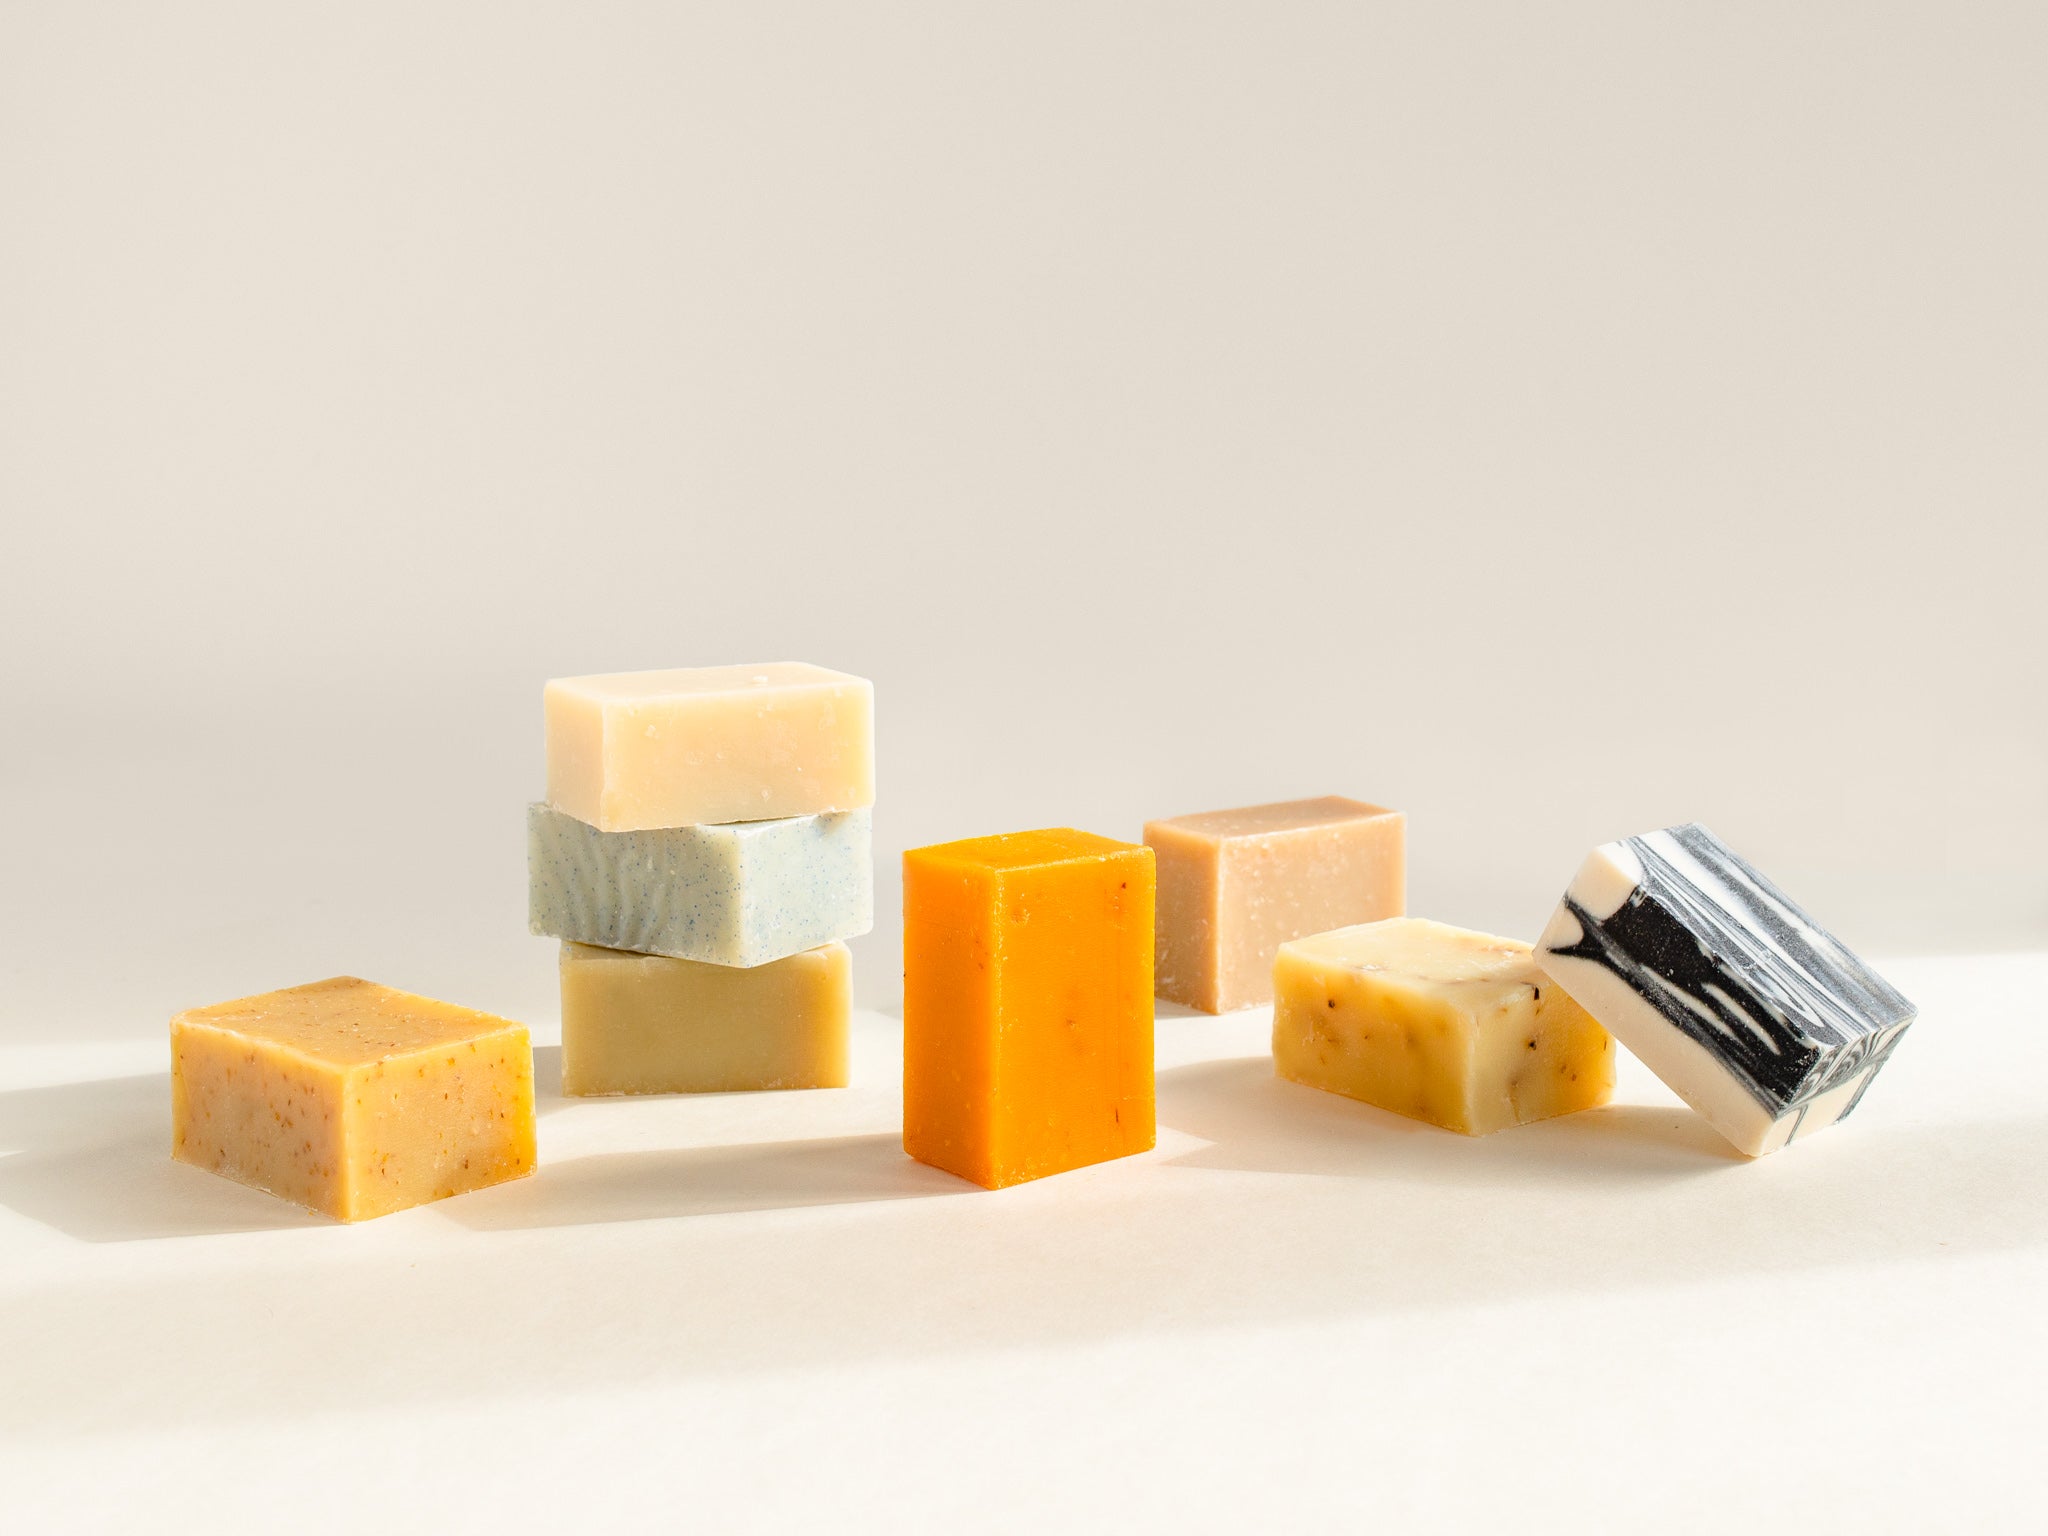 A collection of our natural bar soaps